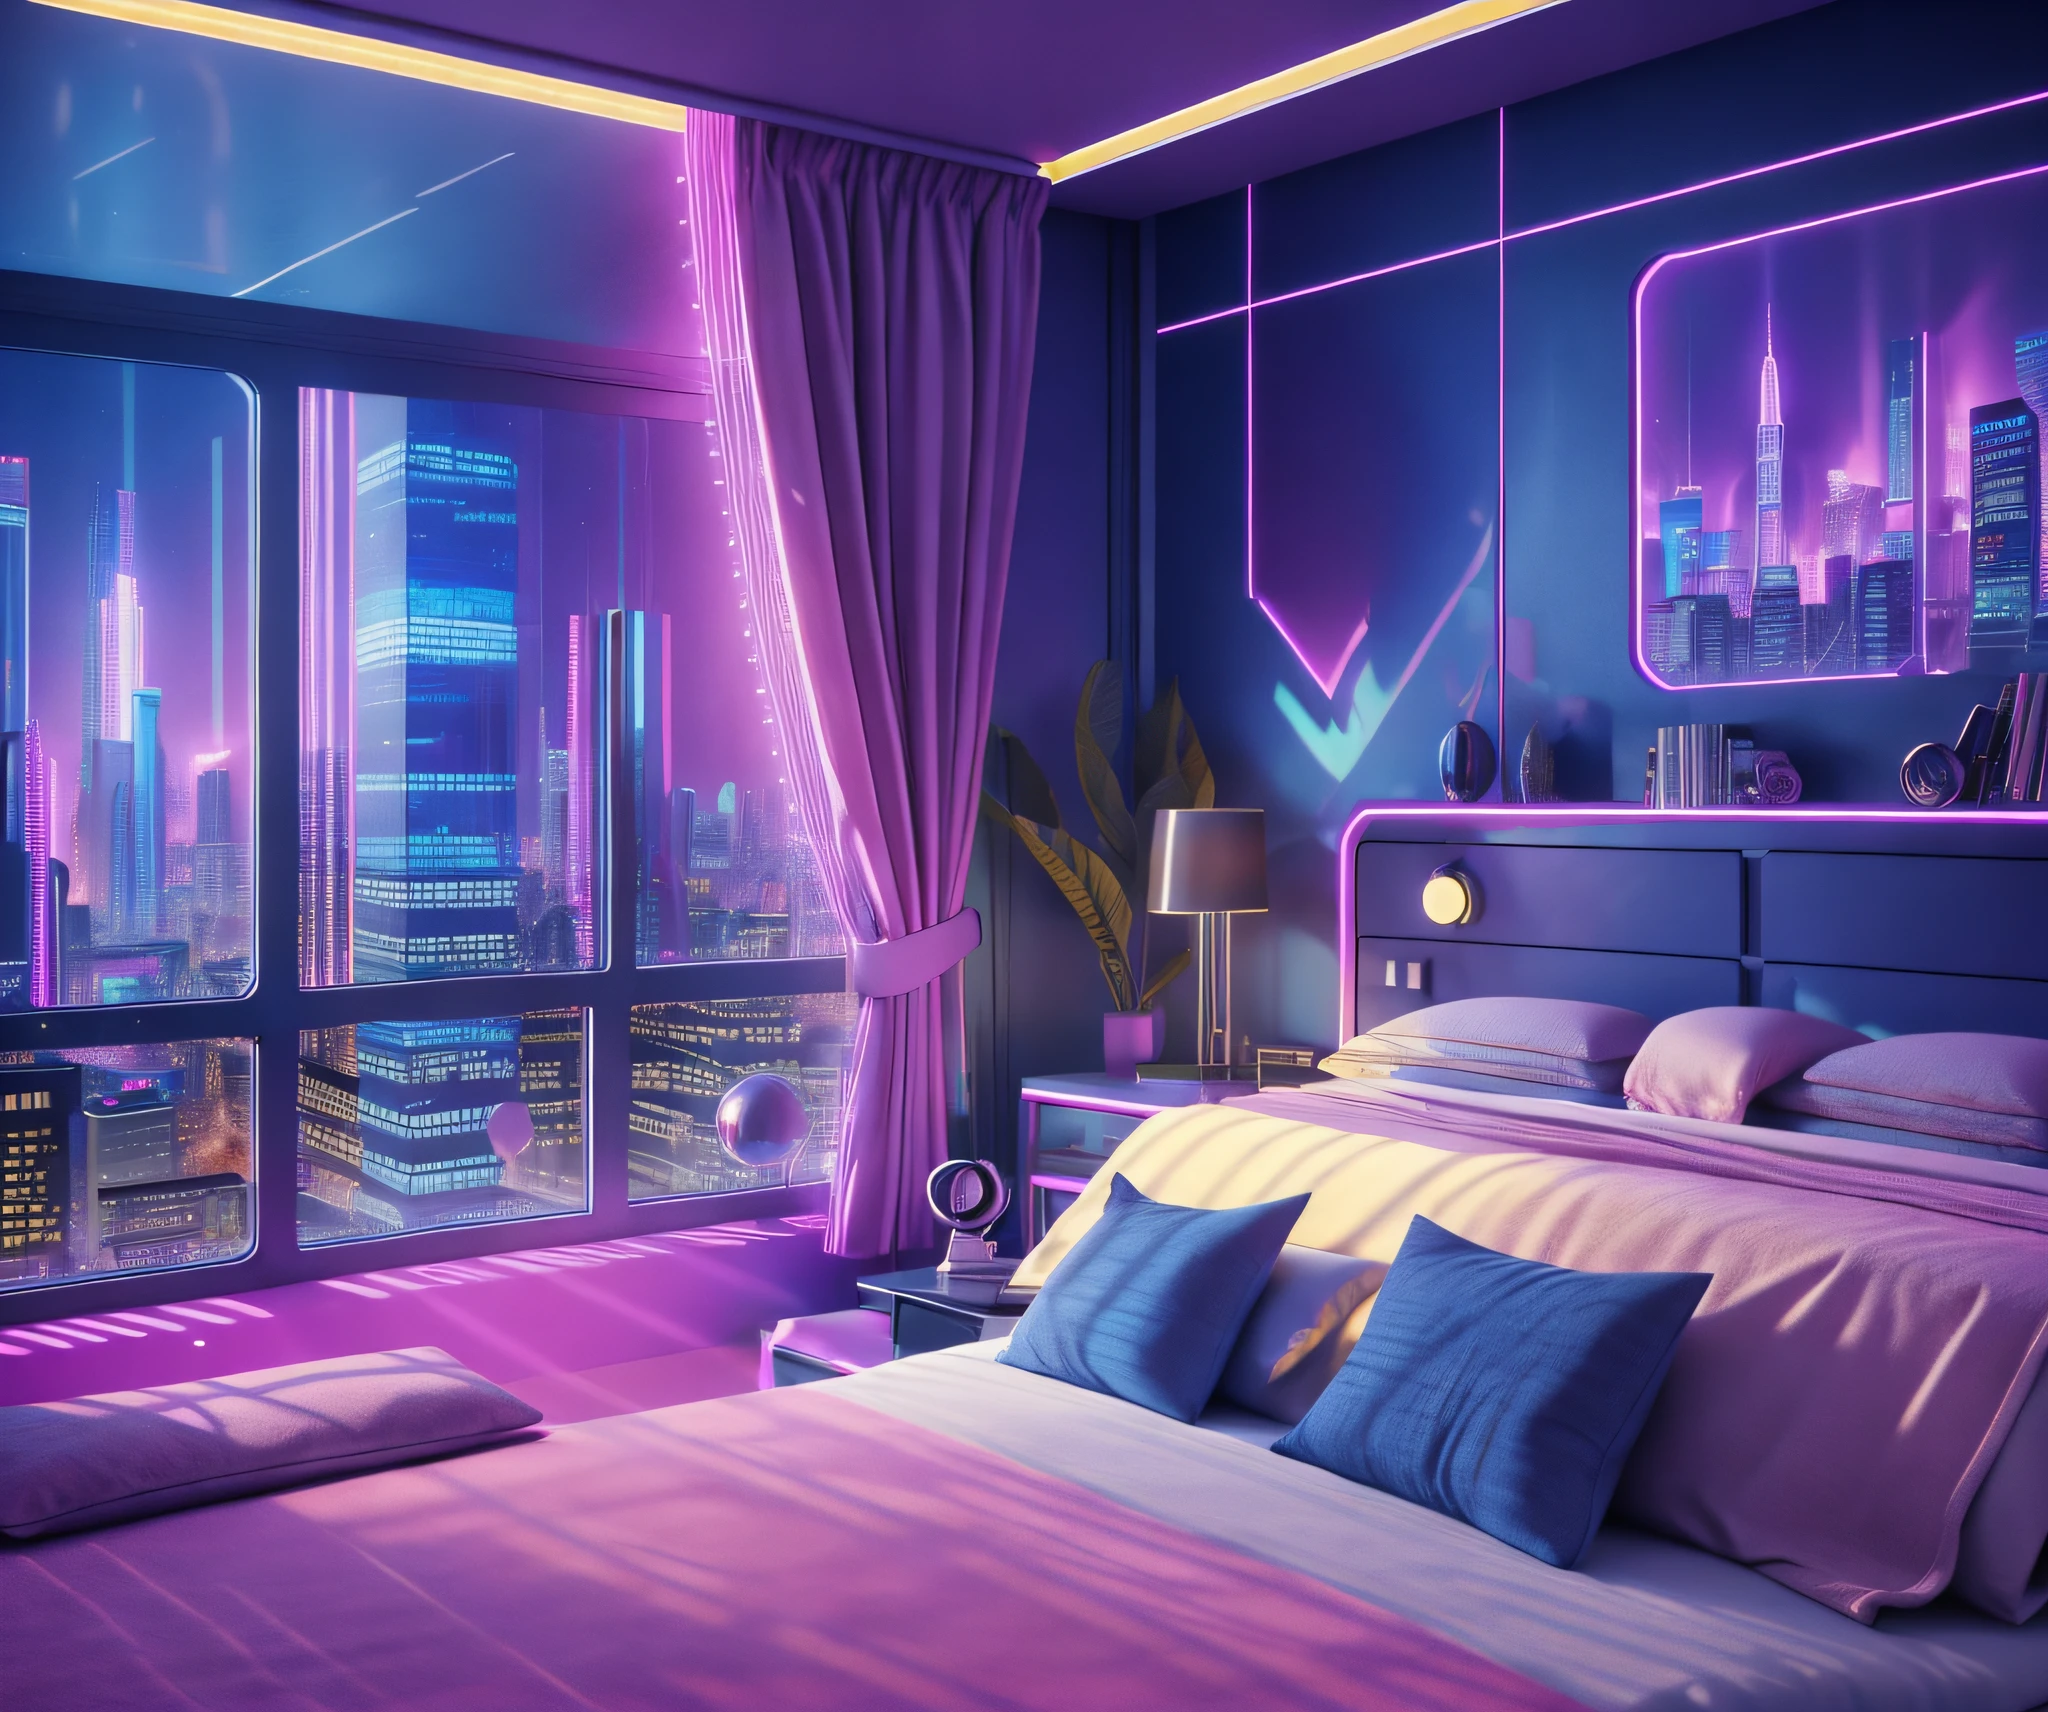 ((masterpiece)), (ultra-detailed), (intricate details), (high resolution CGI artwork 8k), Create an image of a woman's bedroom with atmospheric lighting. One of the walls should feature a big window with a busy, colorful, and detailed cyberpunk cityscape. Futuristic style with lots of colors and LED lights. The cityscape should be extremely detailed with depth of field. Utilize atmospheric lighting to create depth and evoke the feel of a busy futuristic city outside the window. Pay close attention to face details like intricate, hires eyes and bedroom accents. Camera: wide shot showing the room and the window. Lighting: use atmospheric and volumetric lighting to enhance the cityscape details. The room should be illuminated by the neon lights from the cityscape.